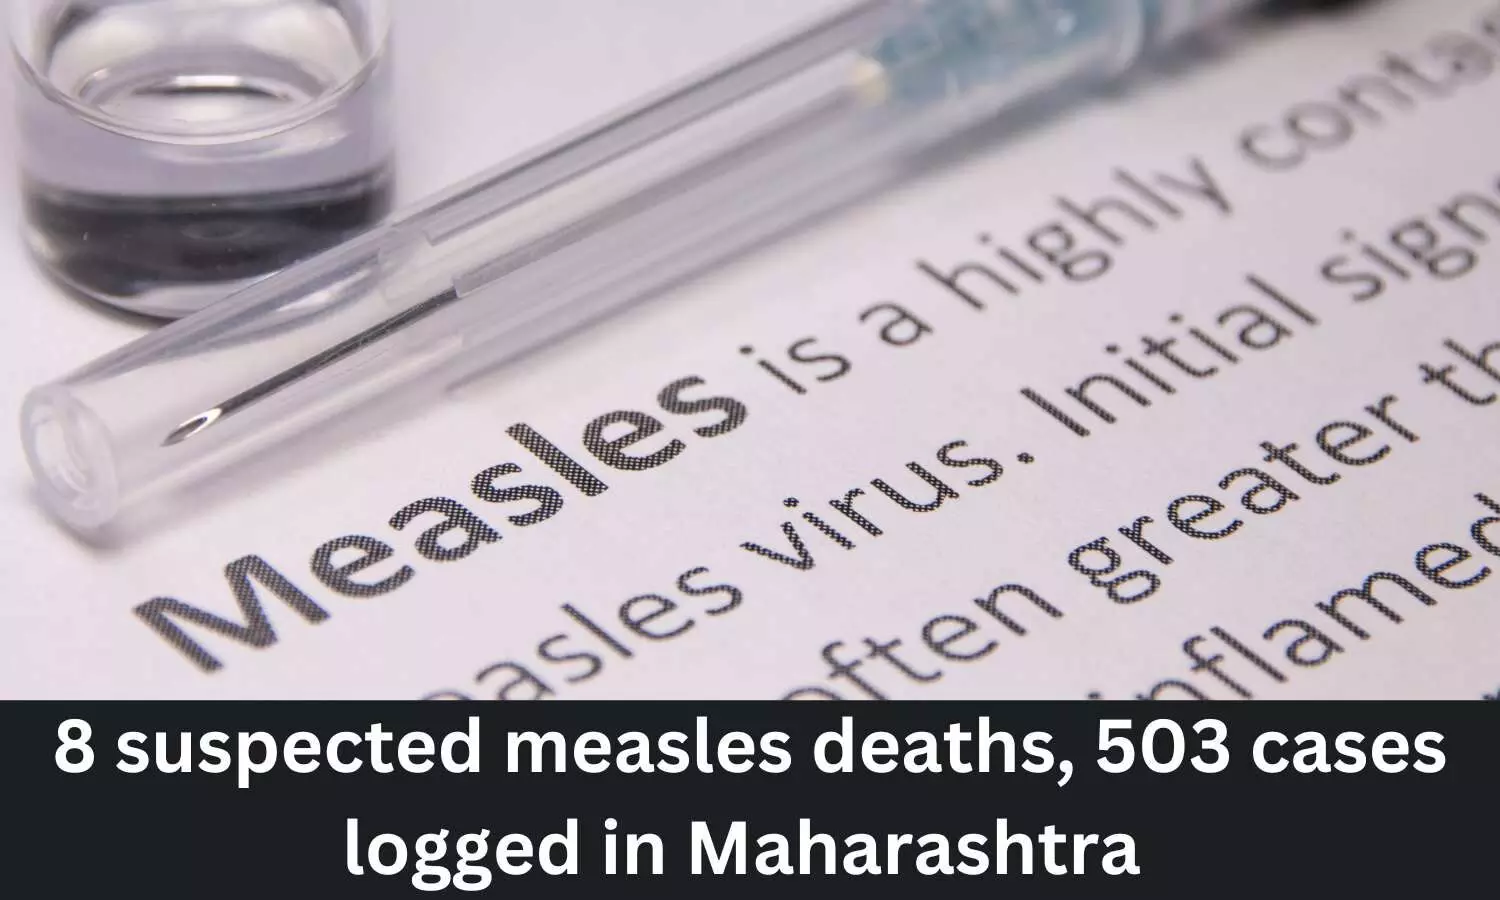 8 suspected measles deaths, 503 cases logged in Maharashtra